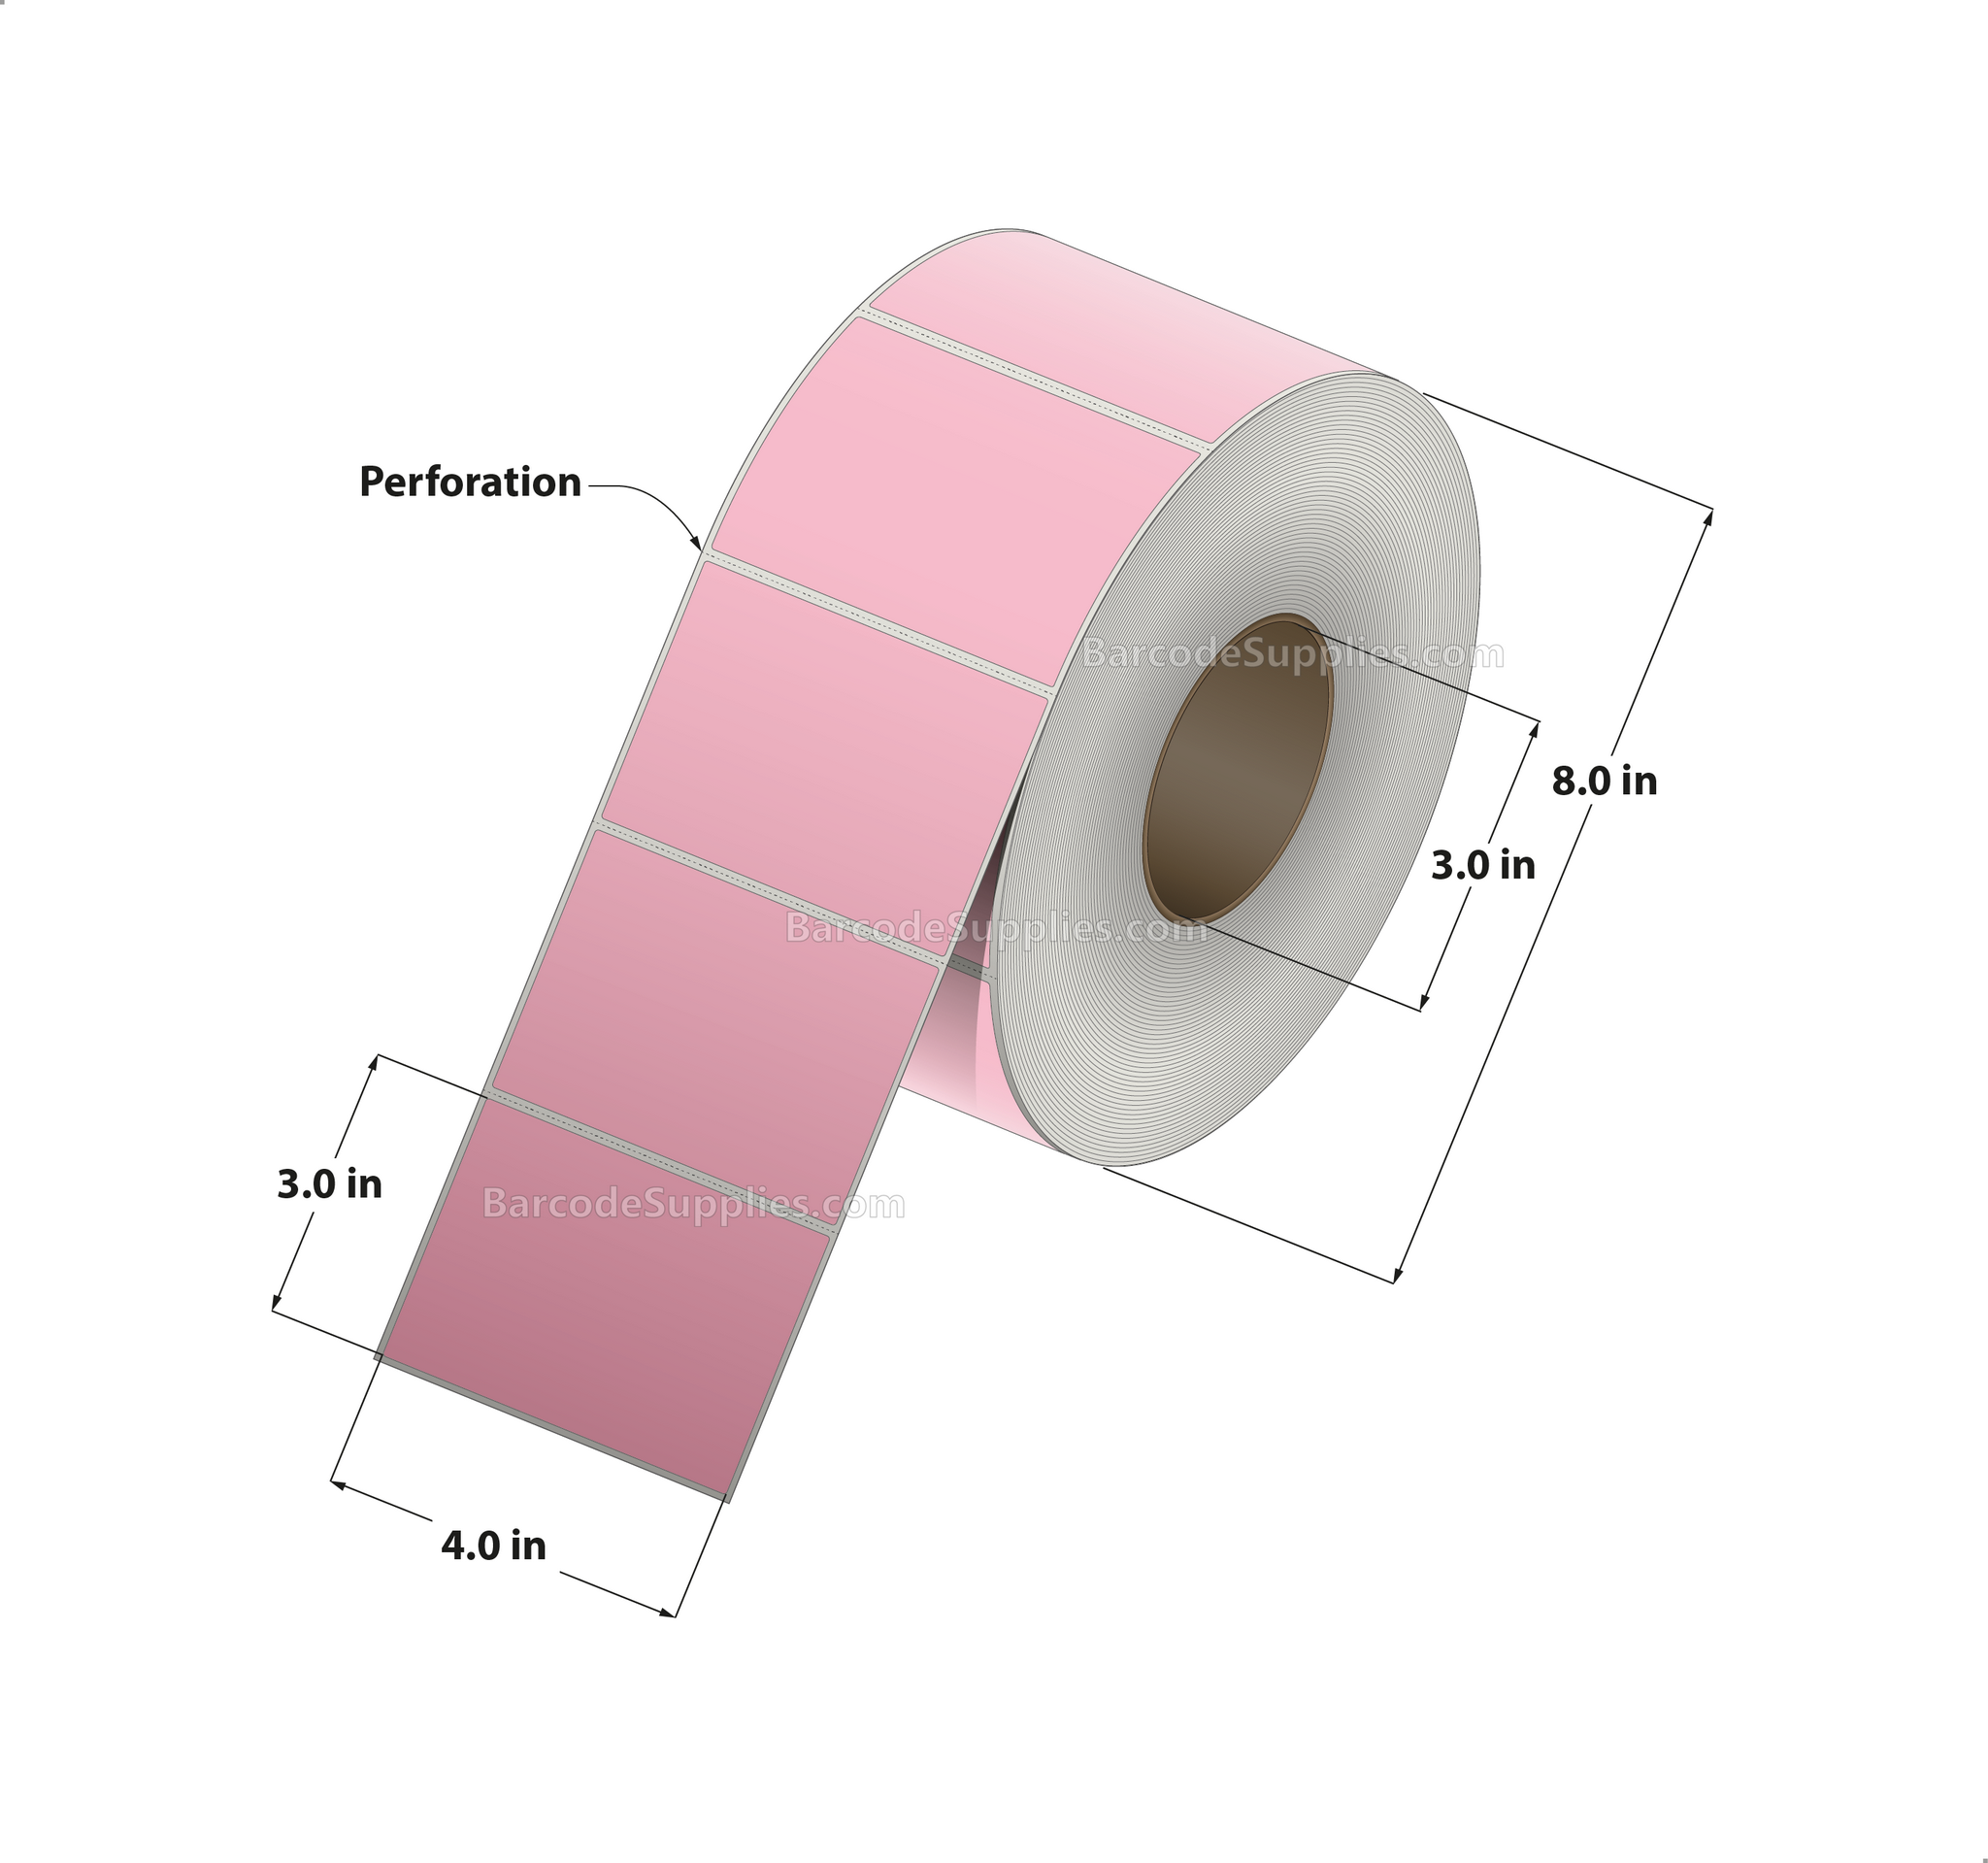 Products 4 x 3 Thermal Transfer 176 Pink Labels With Permanent Adhesive - Perforated - 1900 Labels Per Roll - Carton Of 4 Rolls - 7600 Labels Total - MPN: RFC-4-3-1900-PK